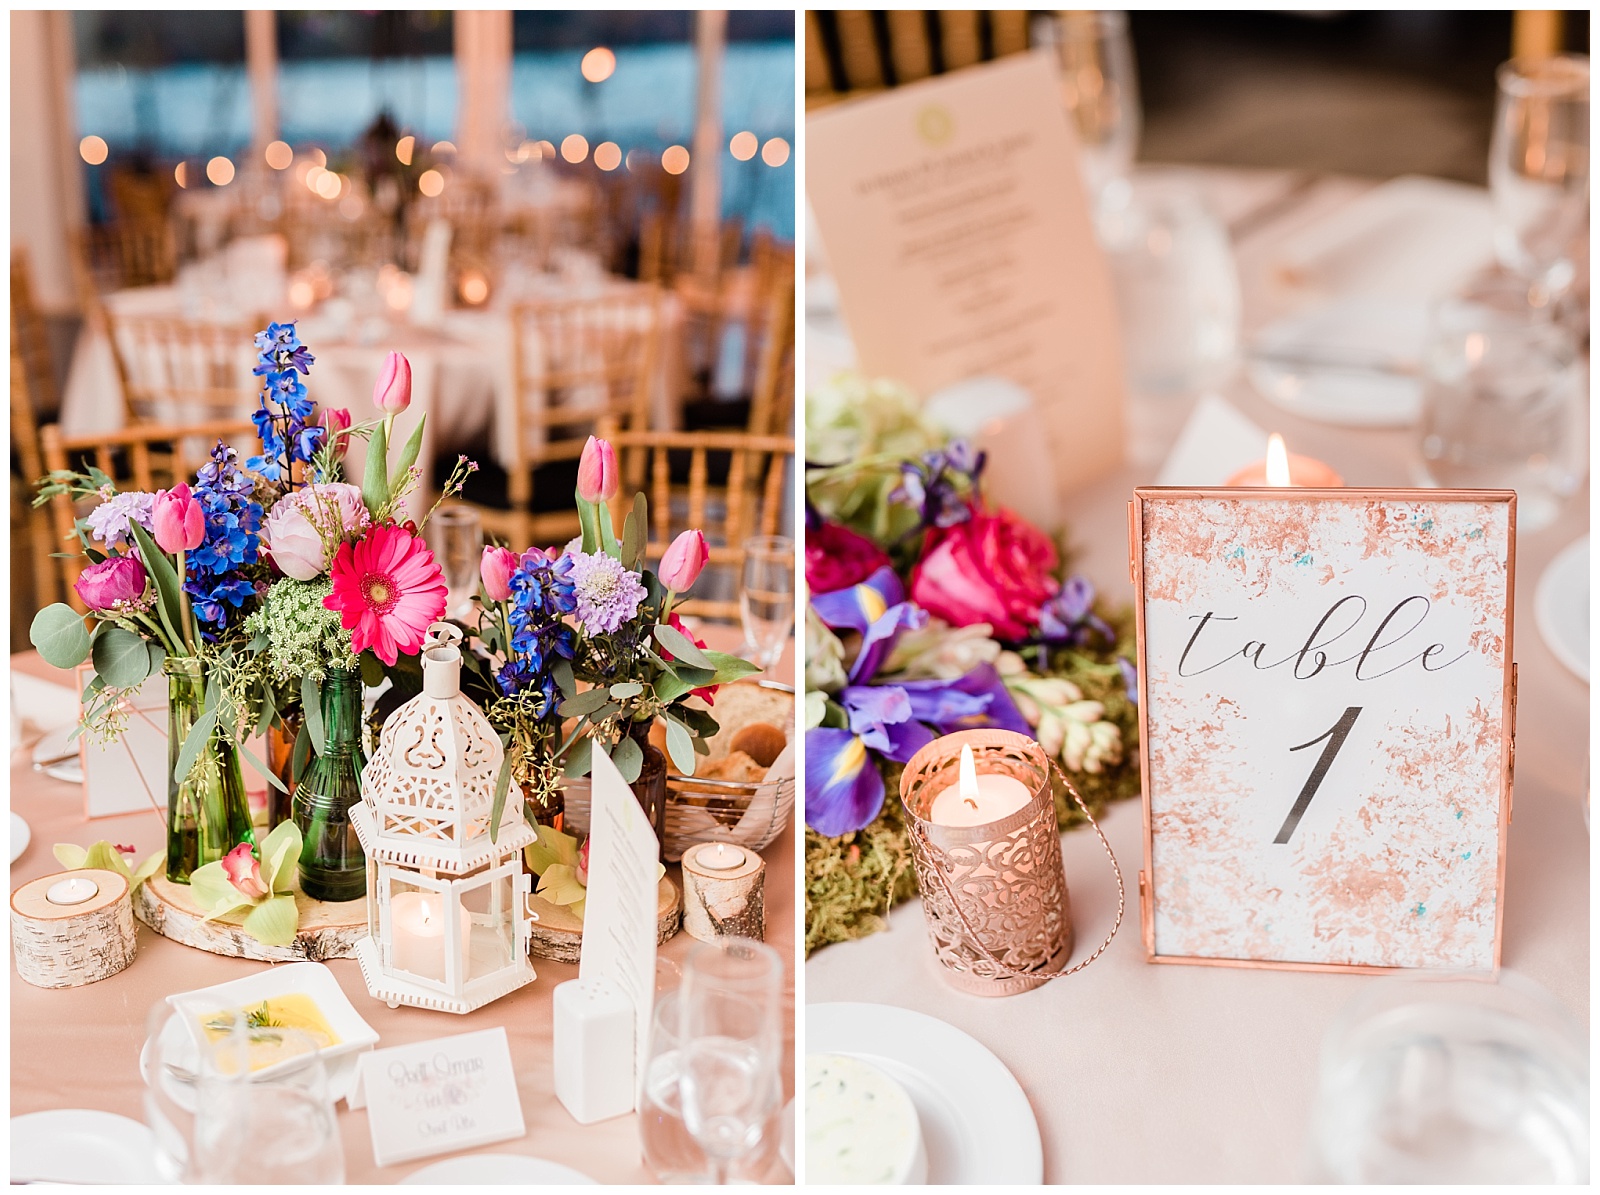 Floral centerpieces with white lanterns and printed table numbers.